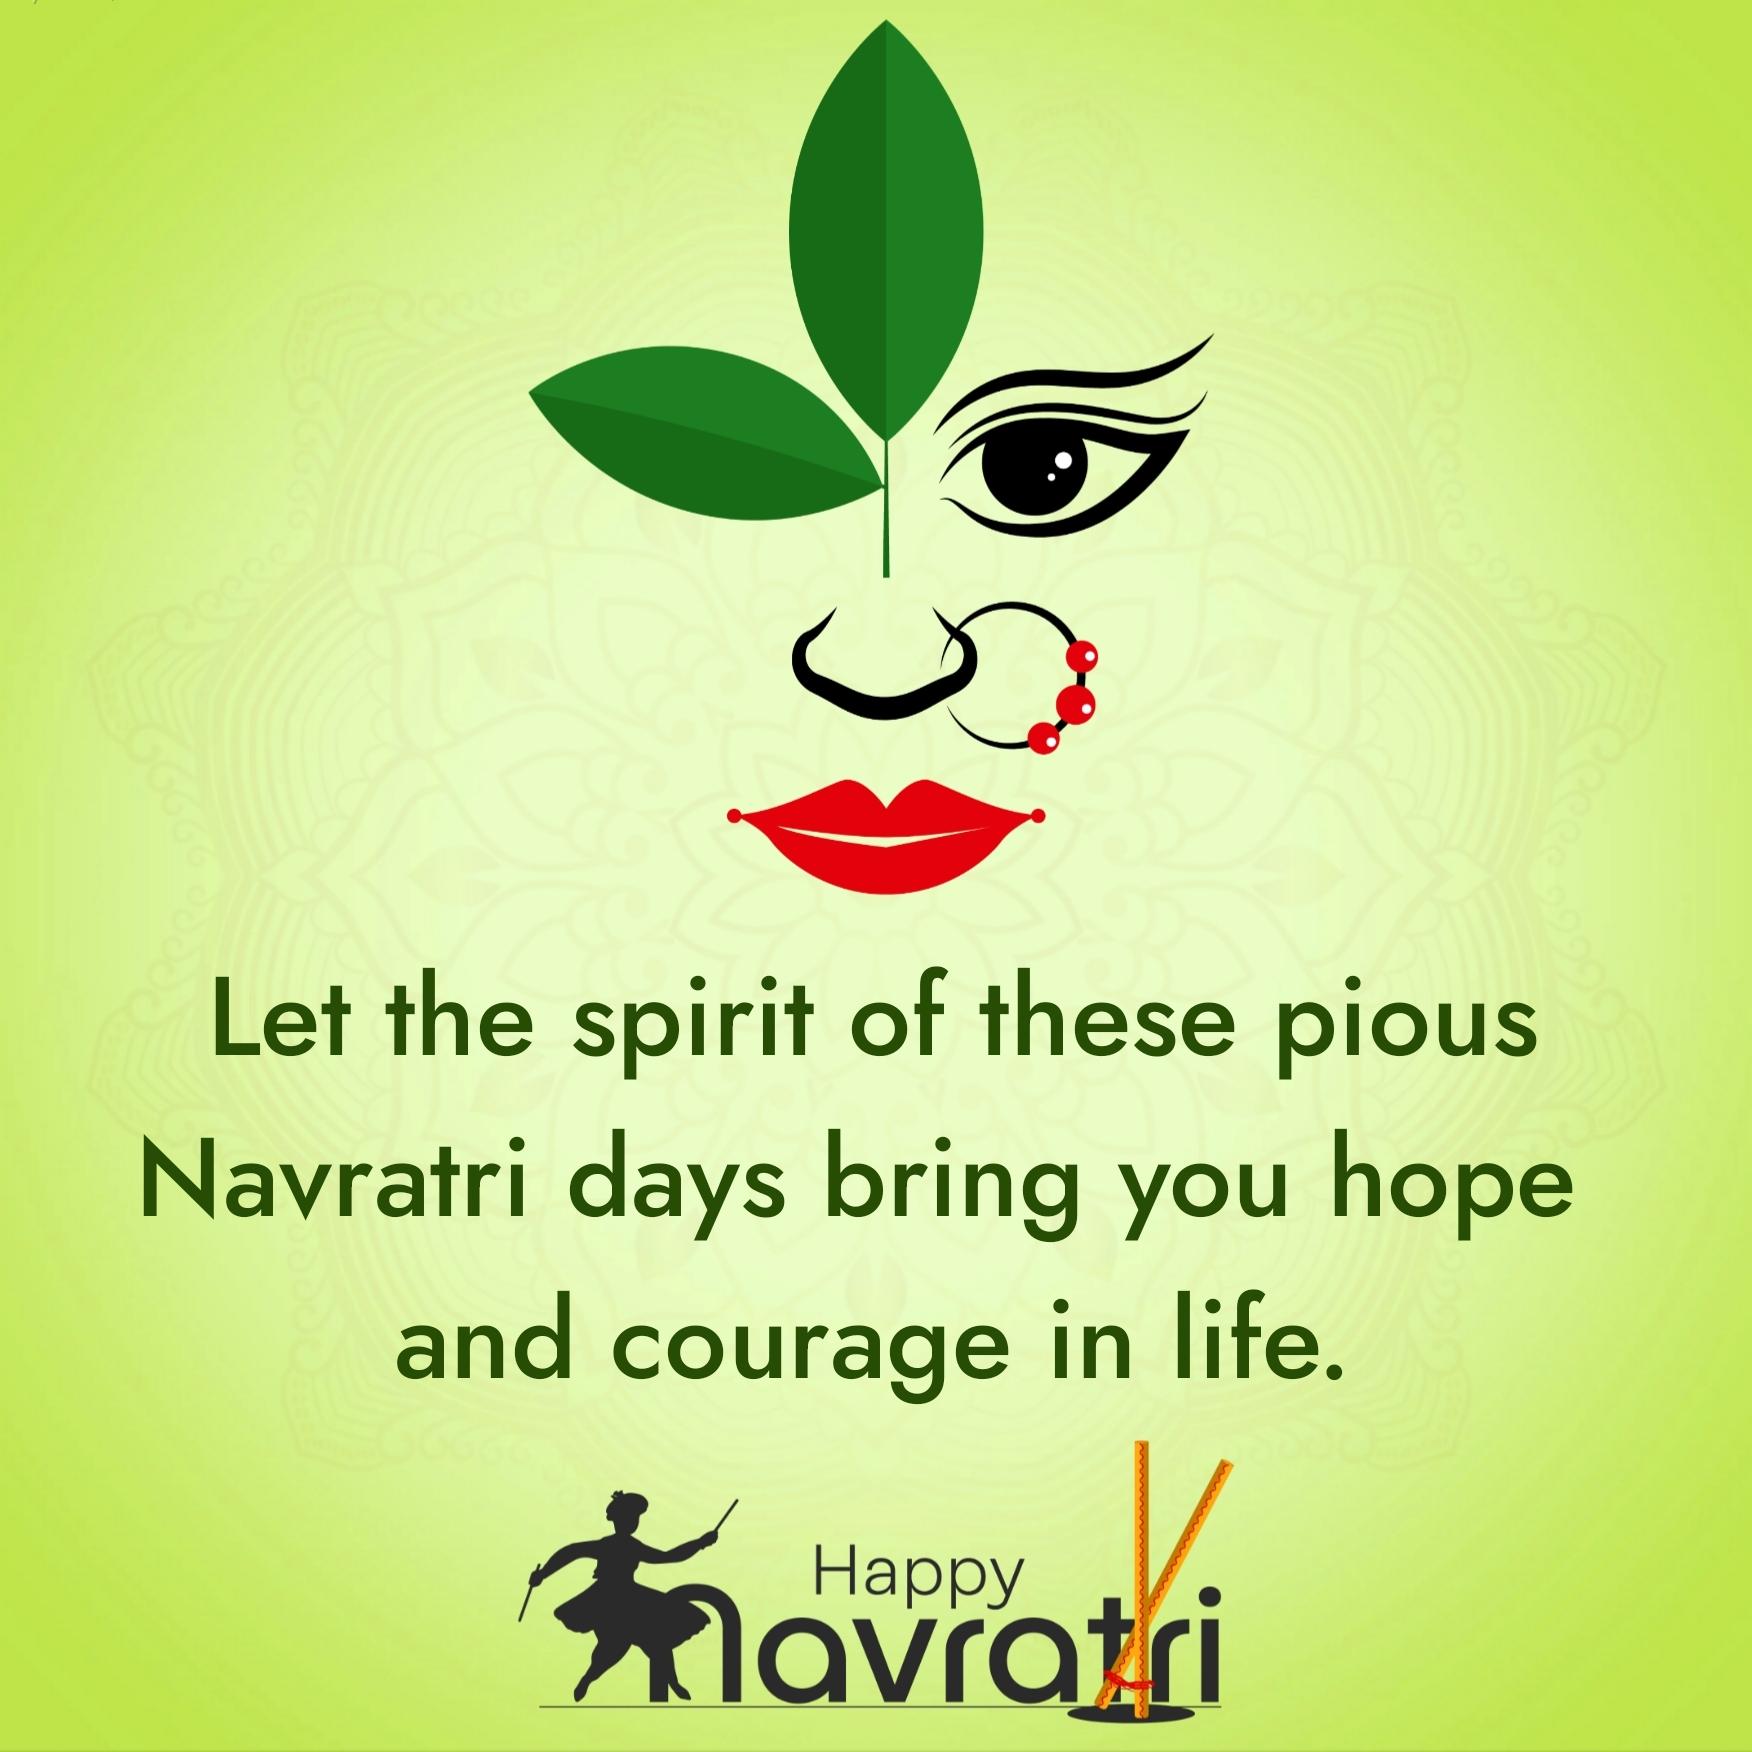 Let the spirit of these pious Navratri days bring you hope